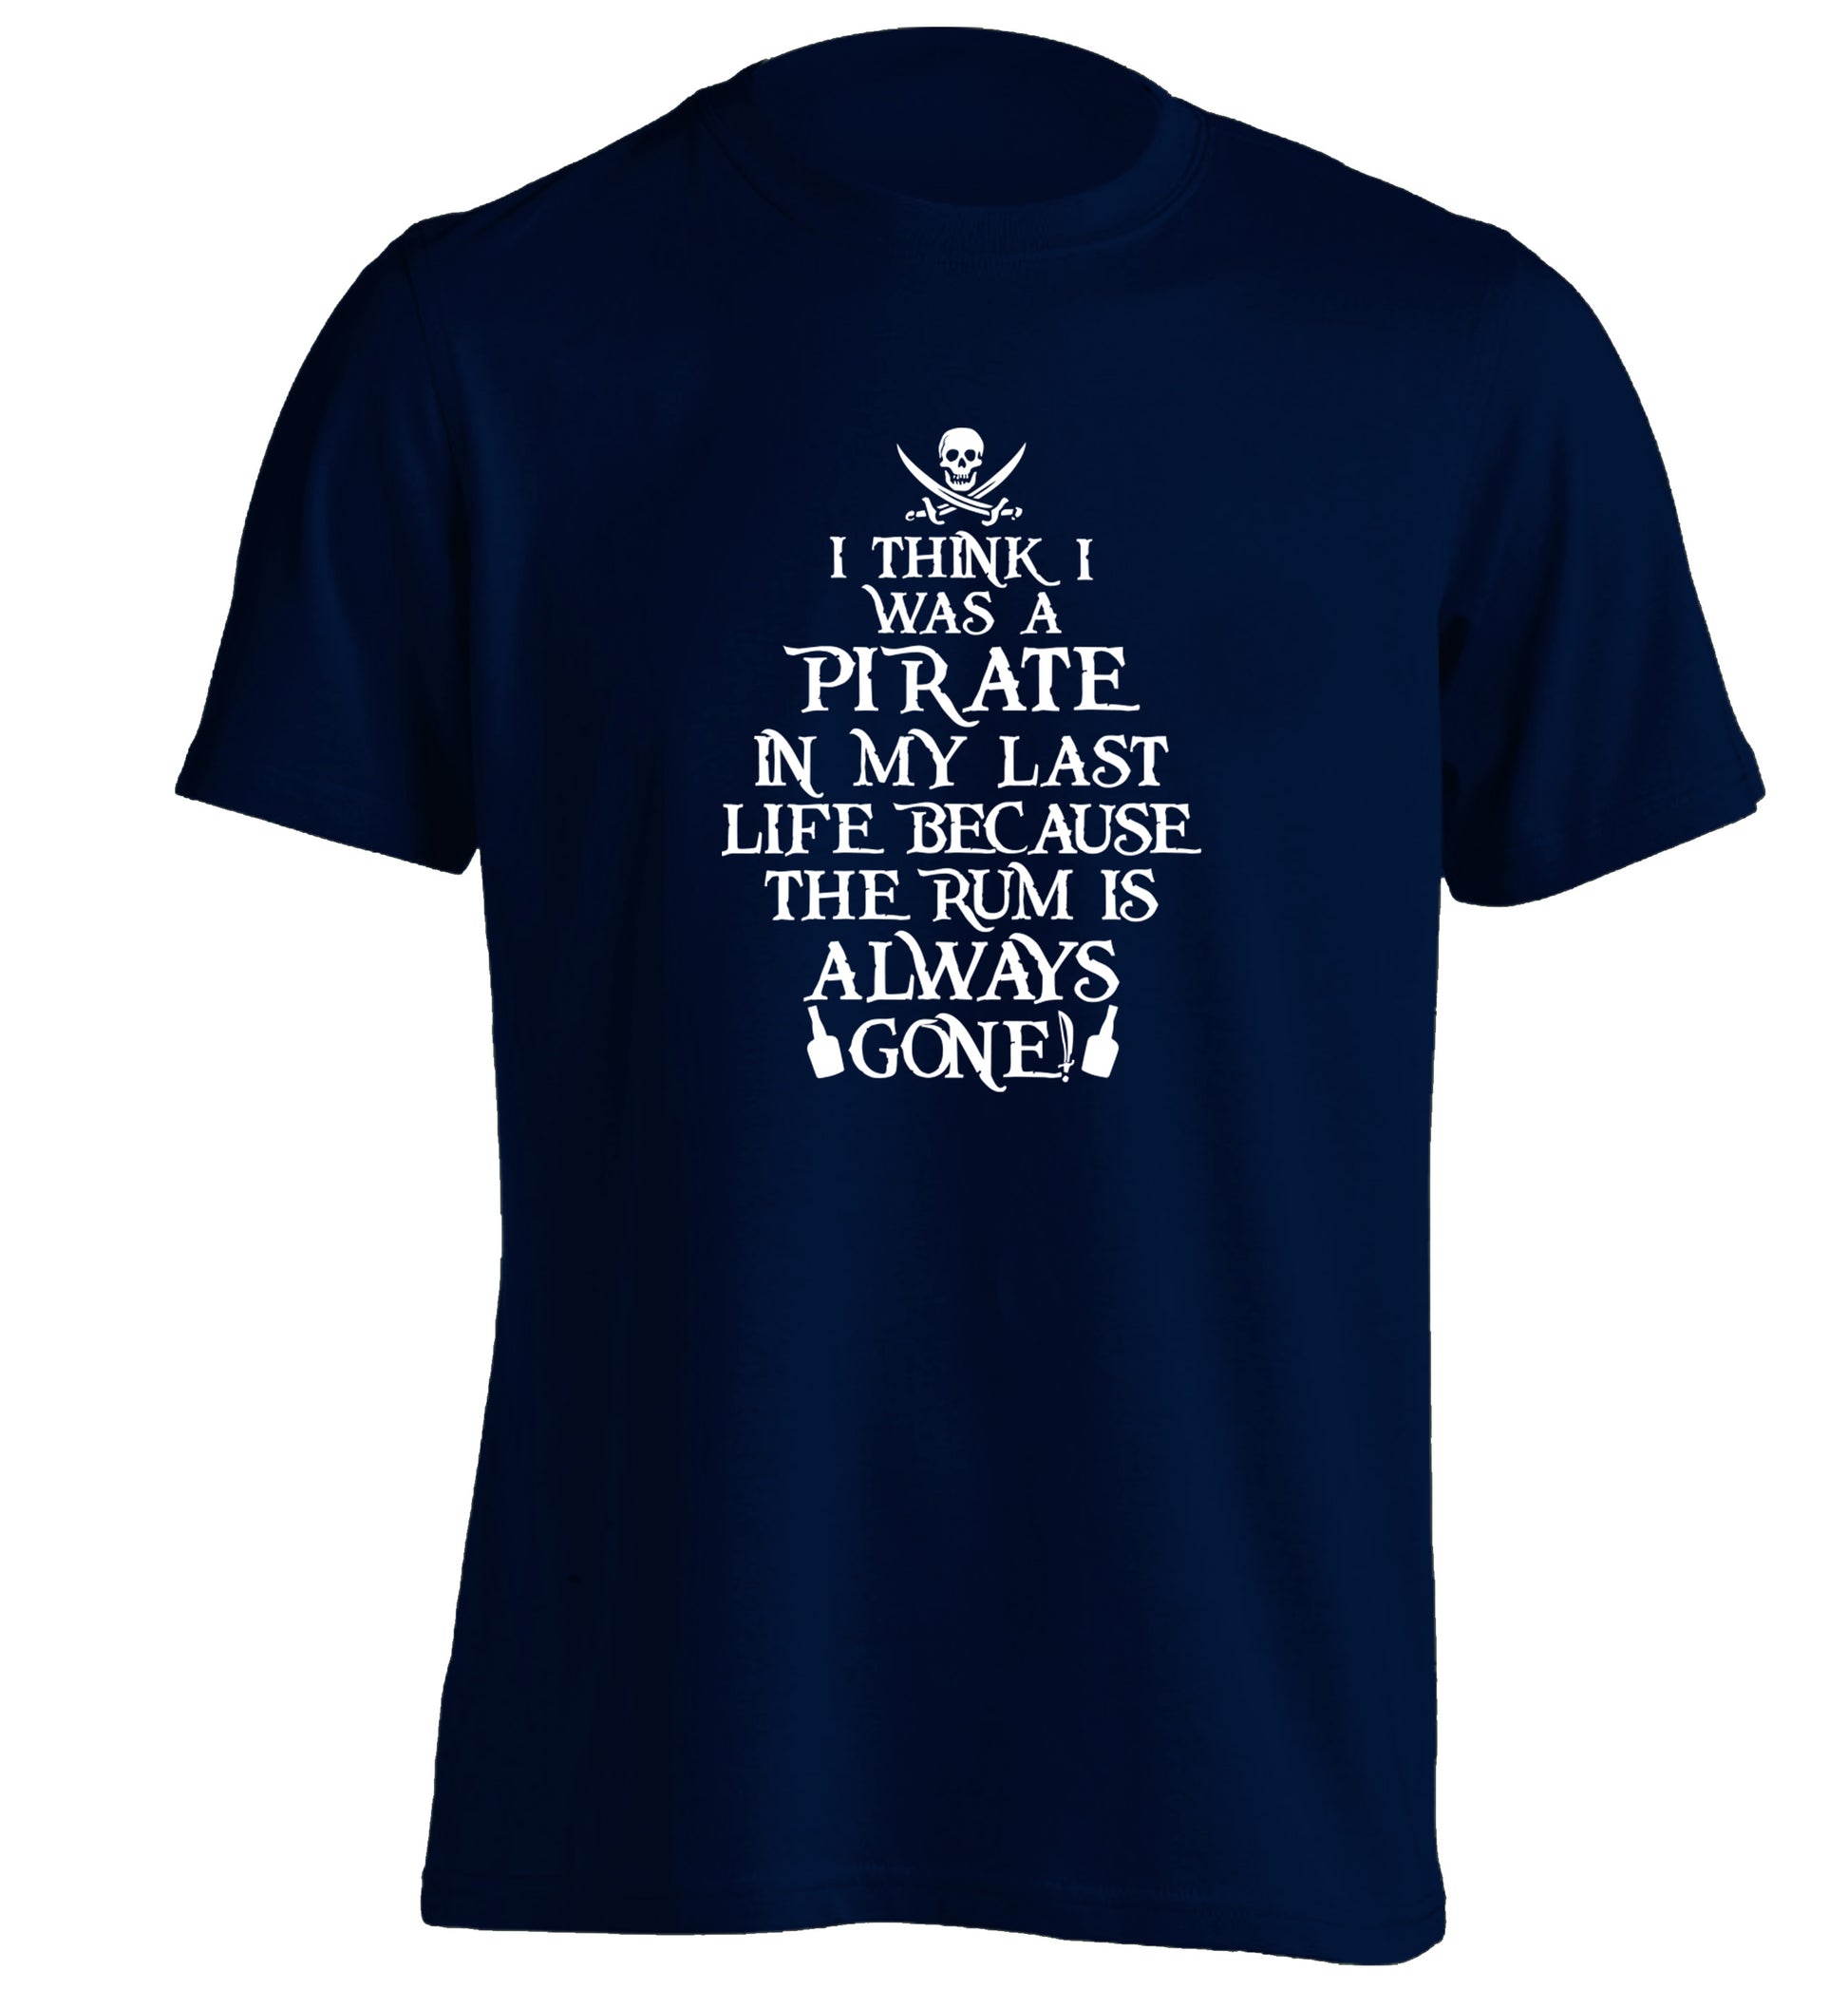 I think I was a pirate in my past life because the rum is always gone! adults unisex navy Tshirt 2XL